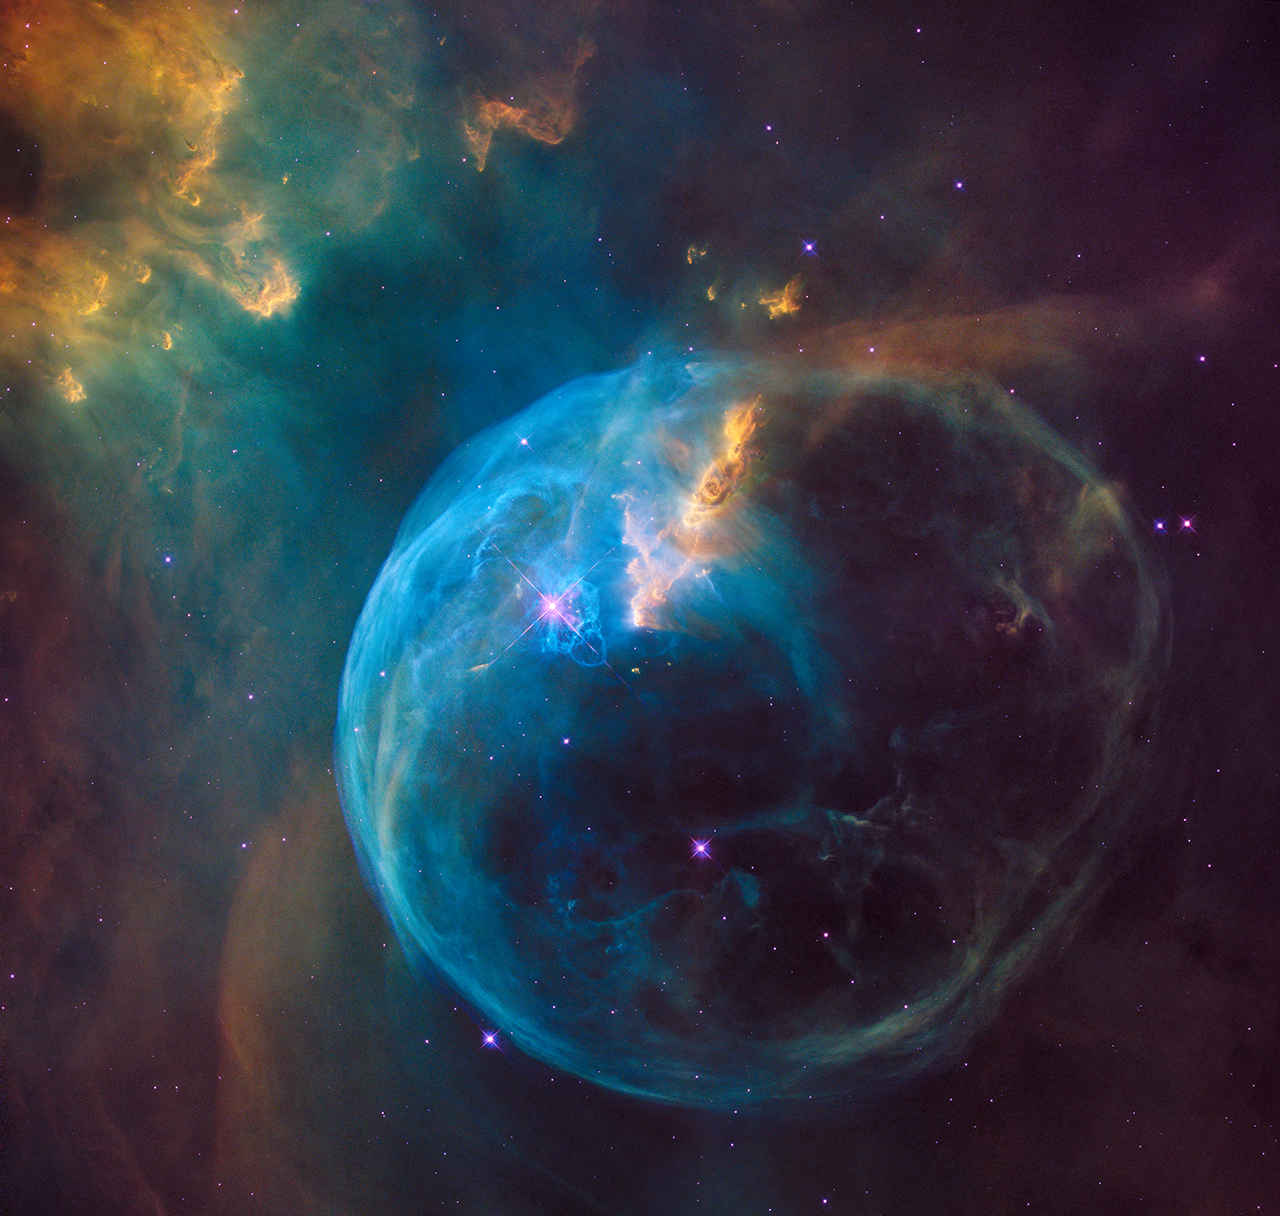 Image credit: NASA, ESA, and the Hubble Heritage Team (STScI/AURA), of the Bubble Nebula as imaged 229 years after its discovery by William Herschel.